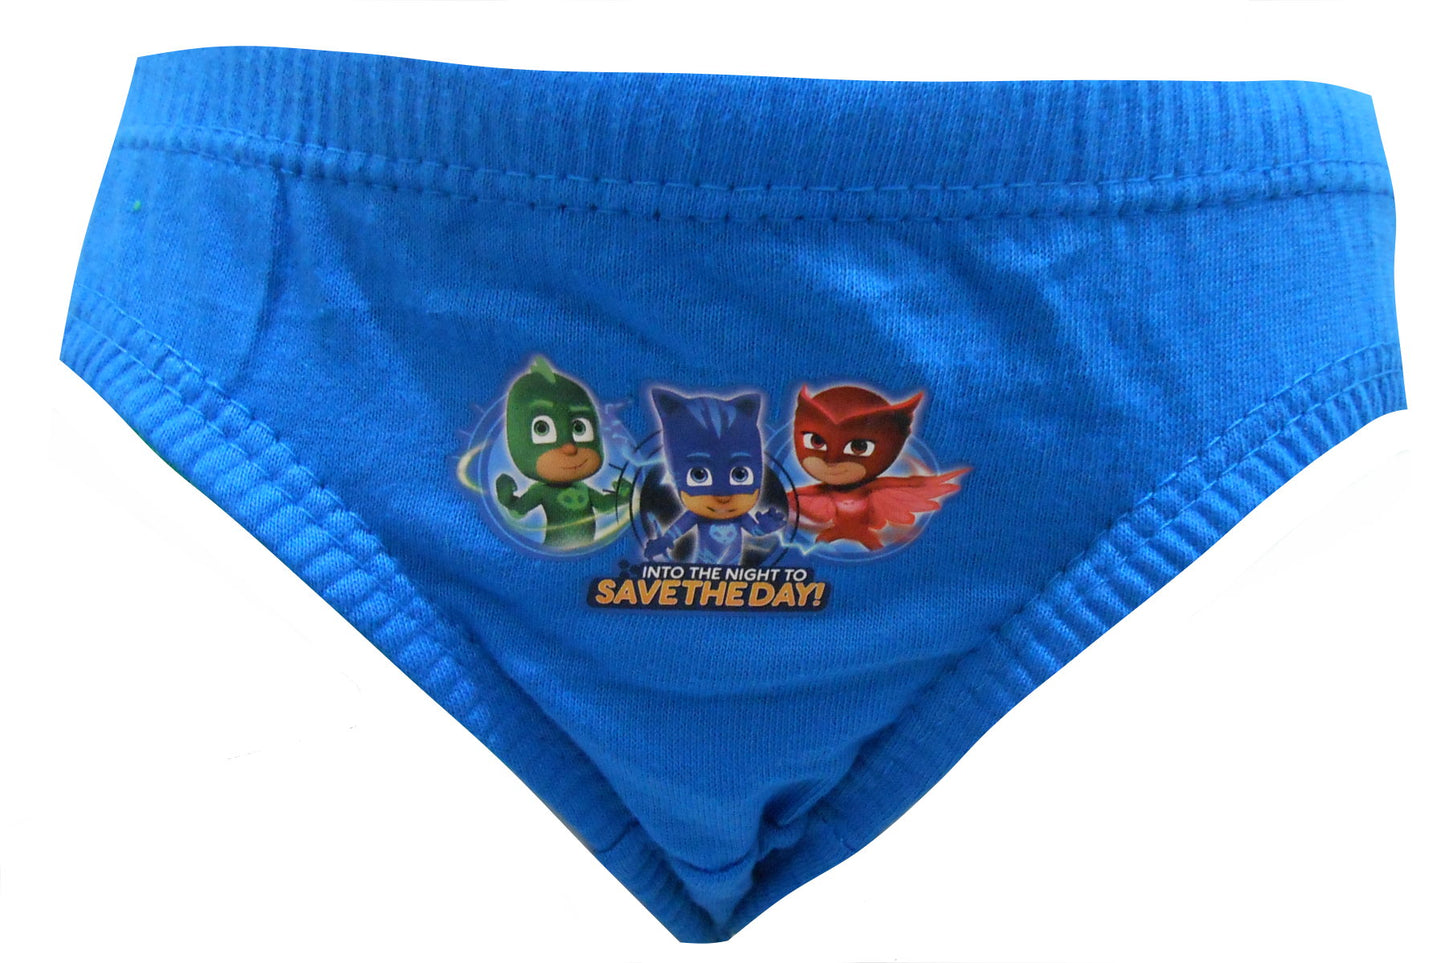 PJ Masks "Save the Day" Boys 6 pack Briefs Underpants 18-24 months